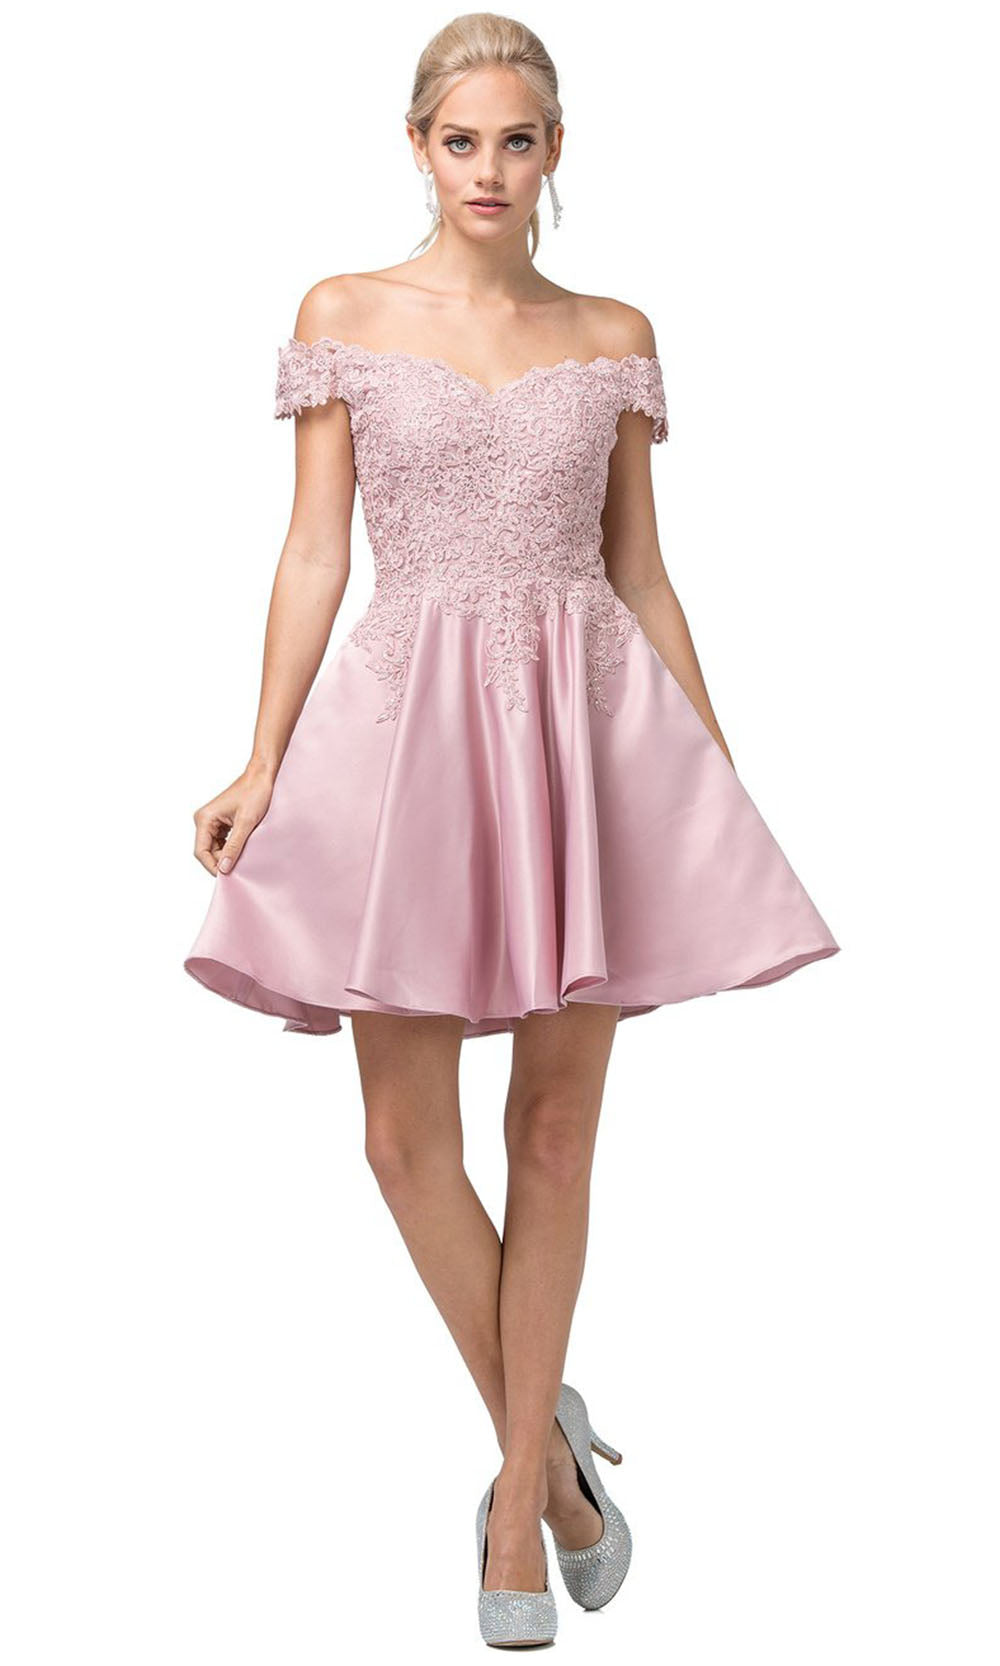 Dancing Queen - 3213 Off-Shoulder Lace Bodice Satin A-Line Dress In Pink